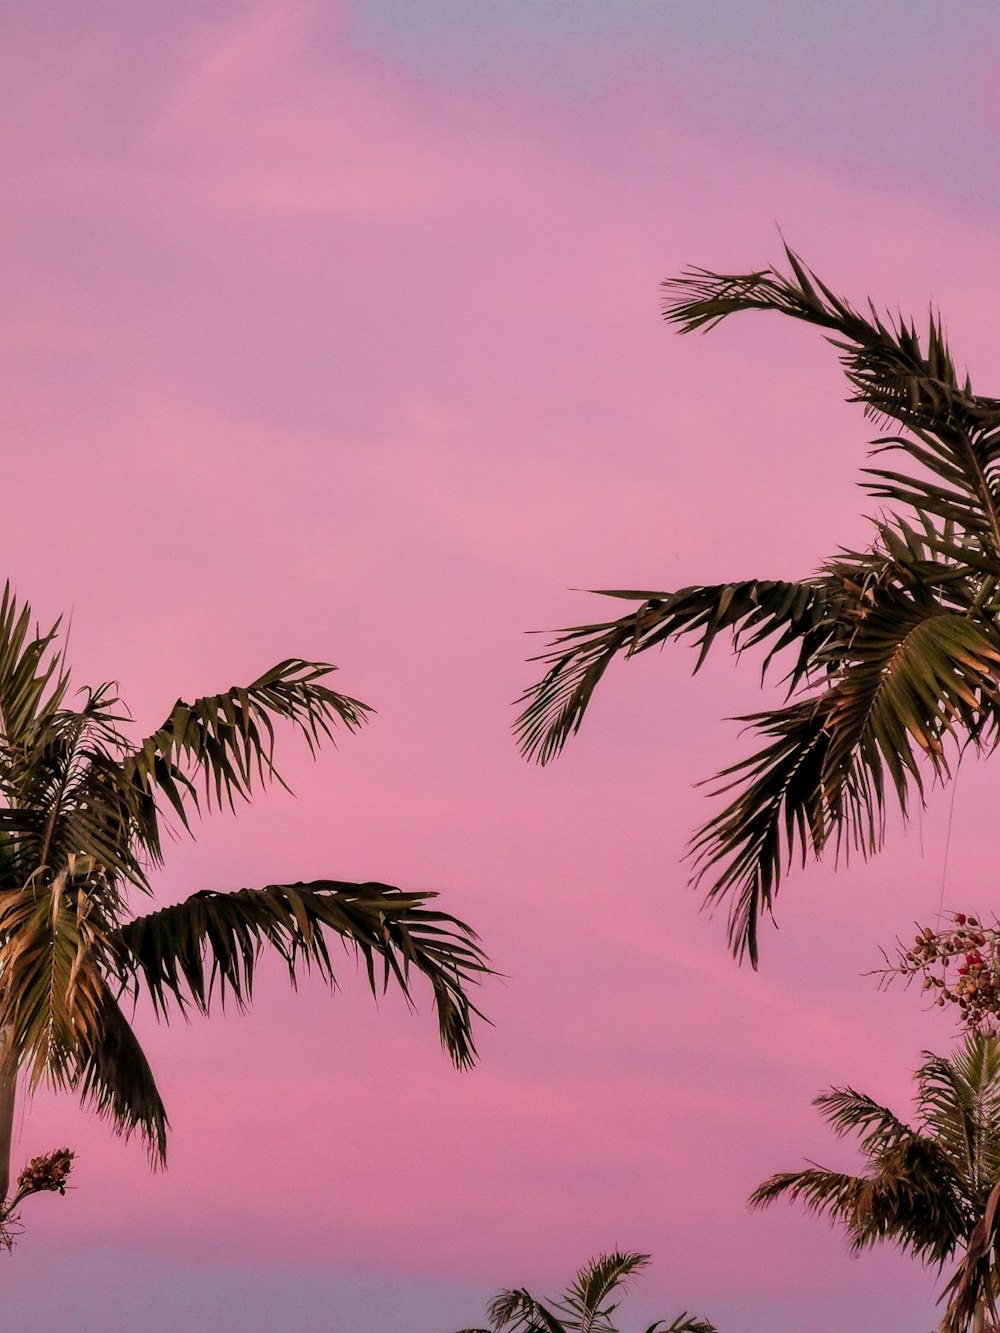 550+ Pink Aesthetic Pictures | Download Free Images on Unsplash